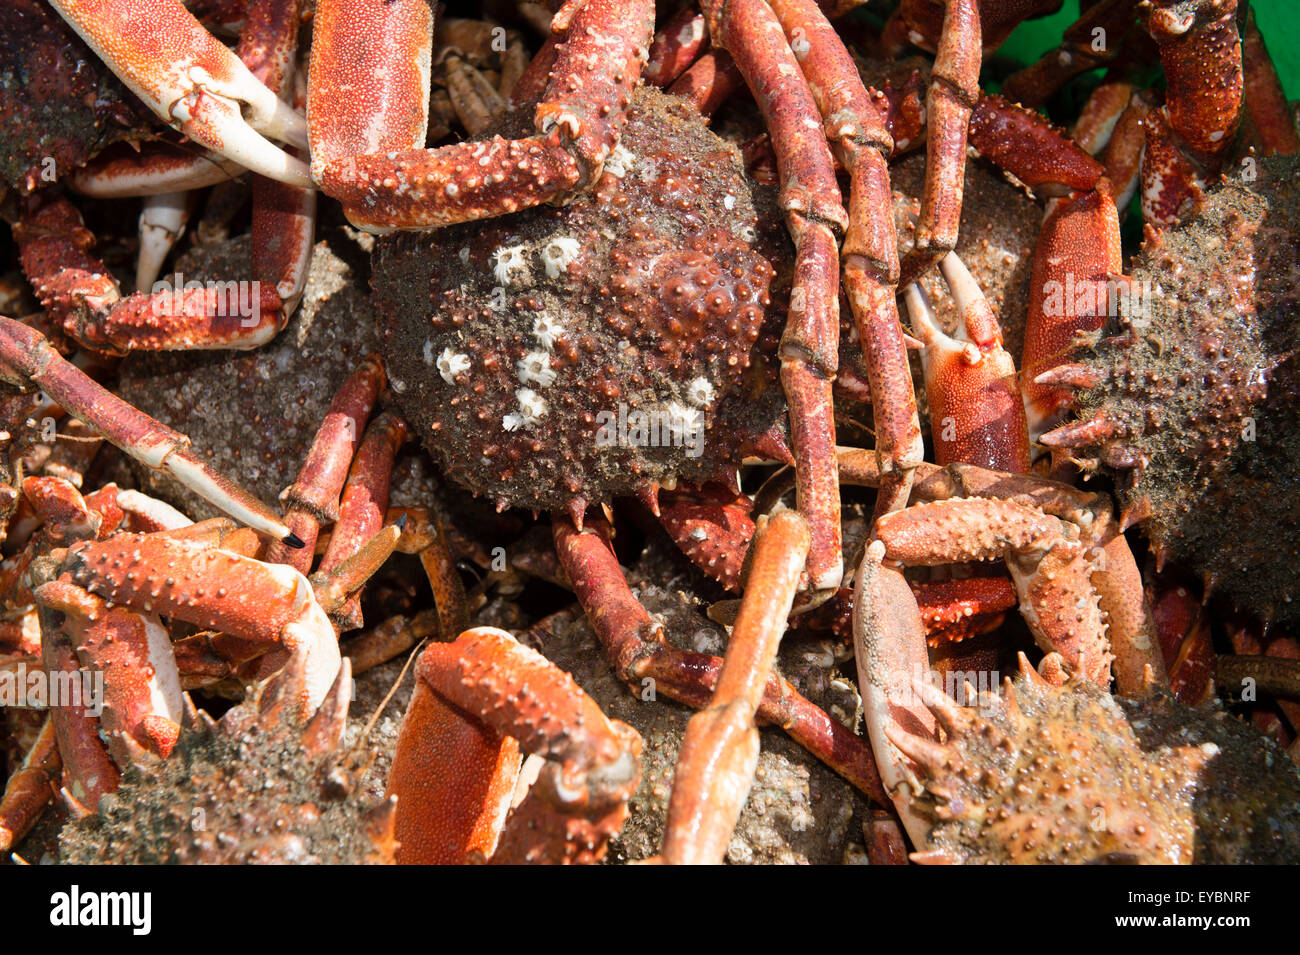 Spider crabs caught in Cardigan Bay Wales UK Stock Photo